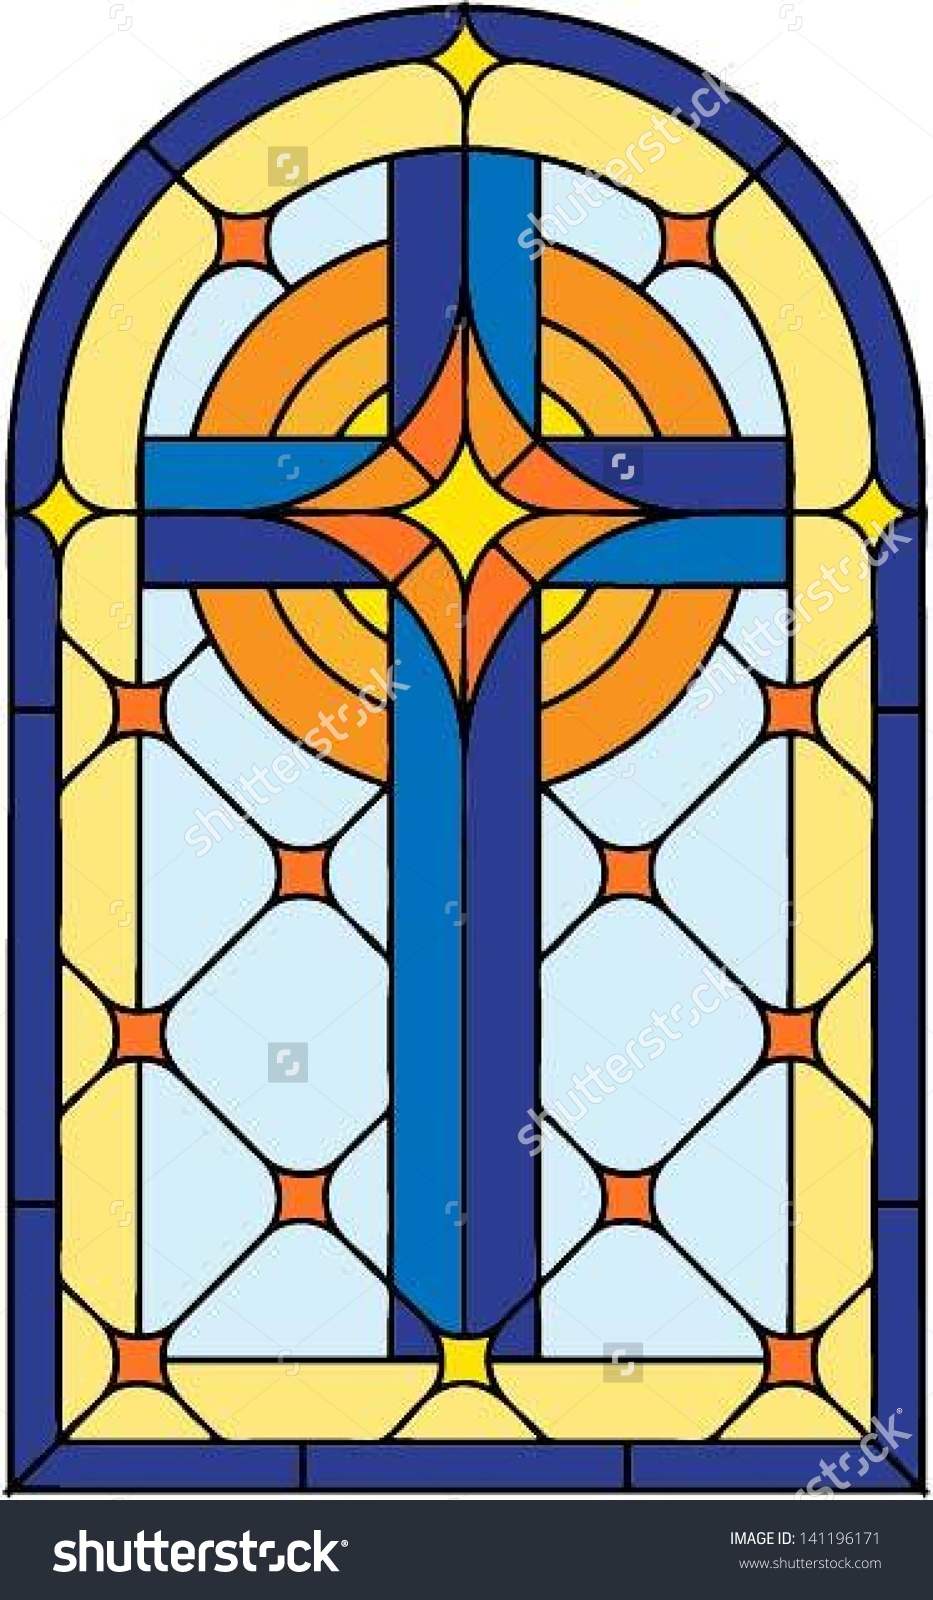 stained glass window clipart - photo #9